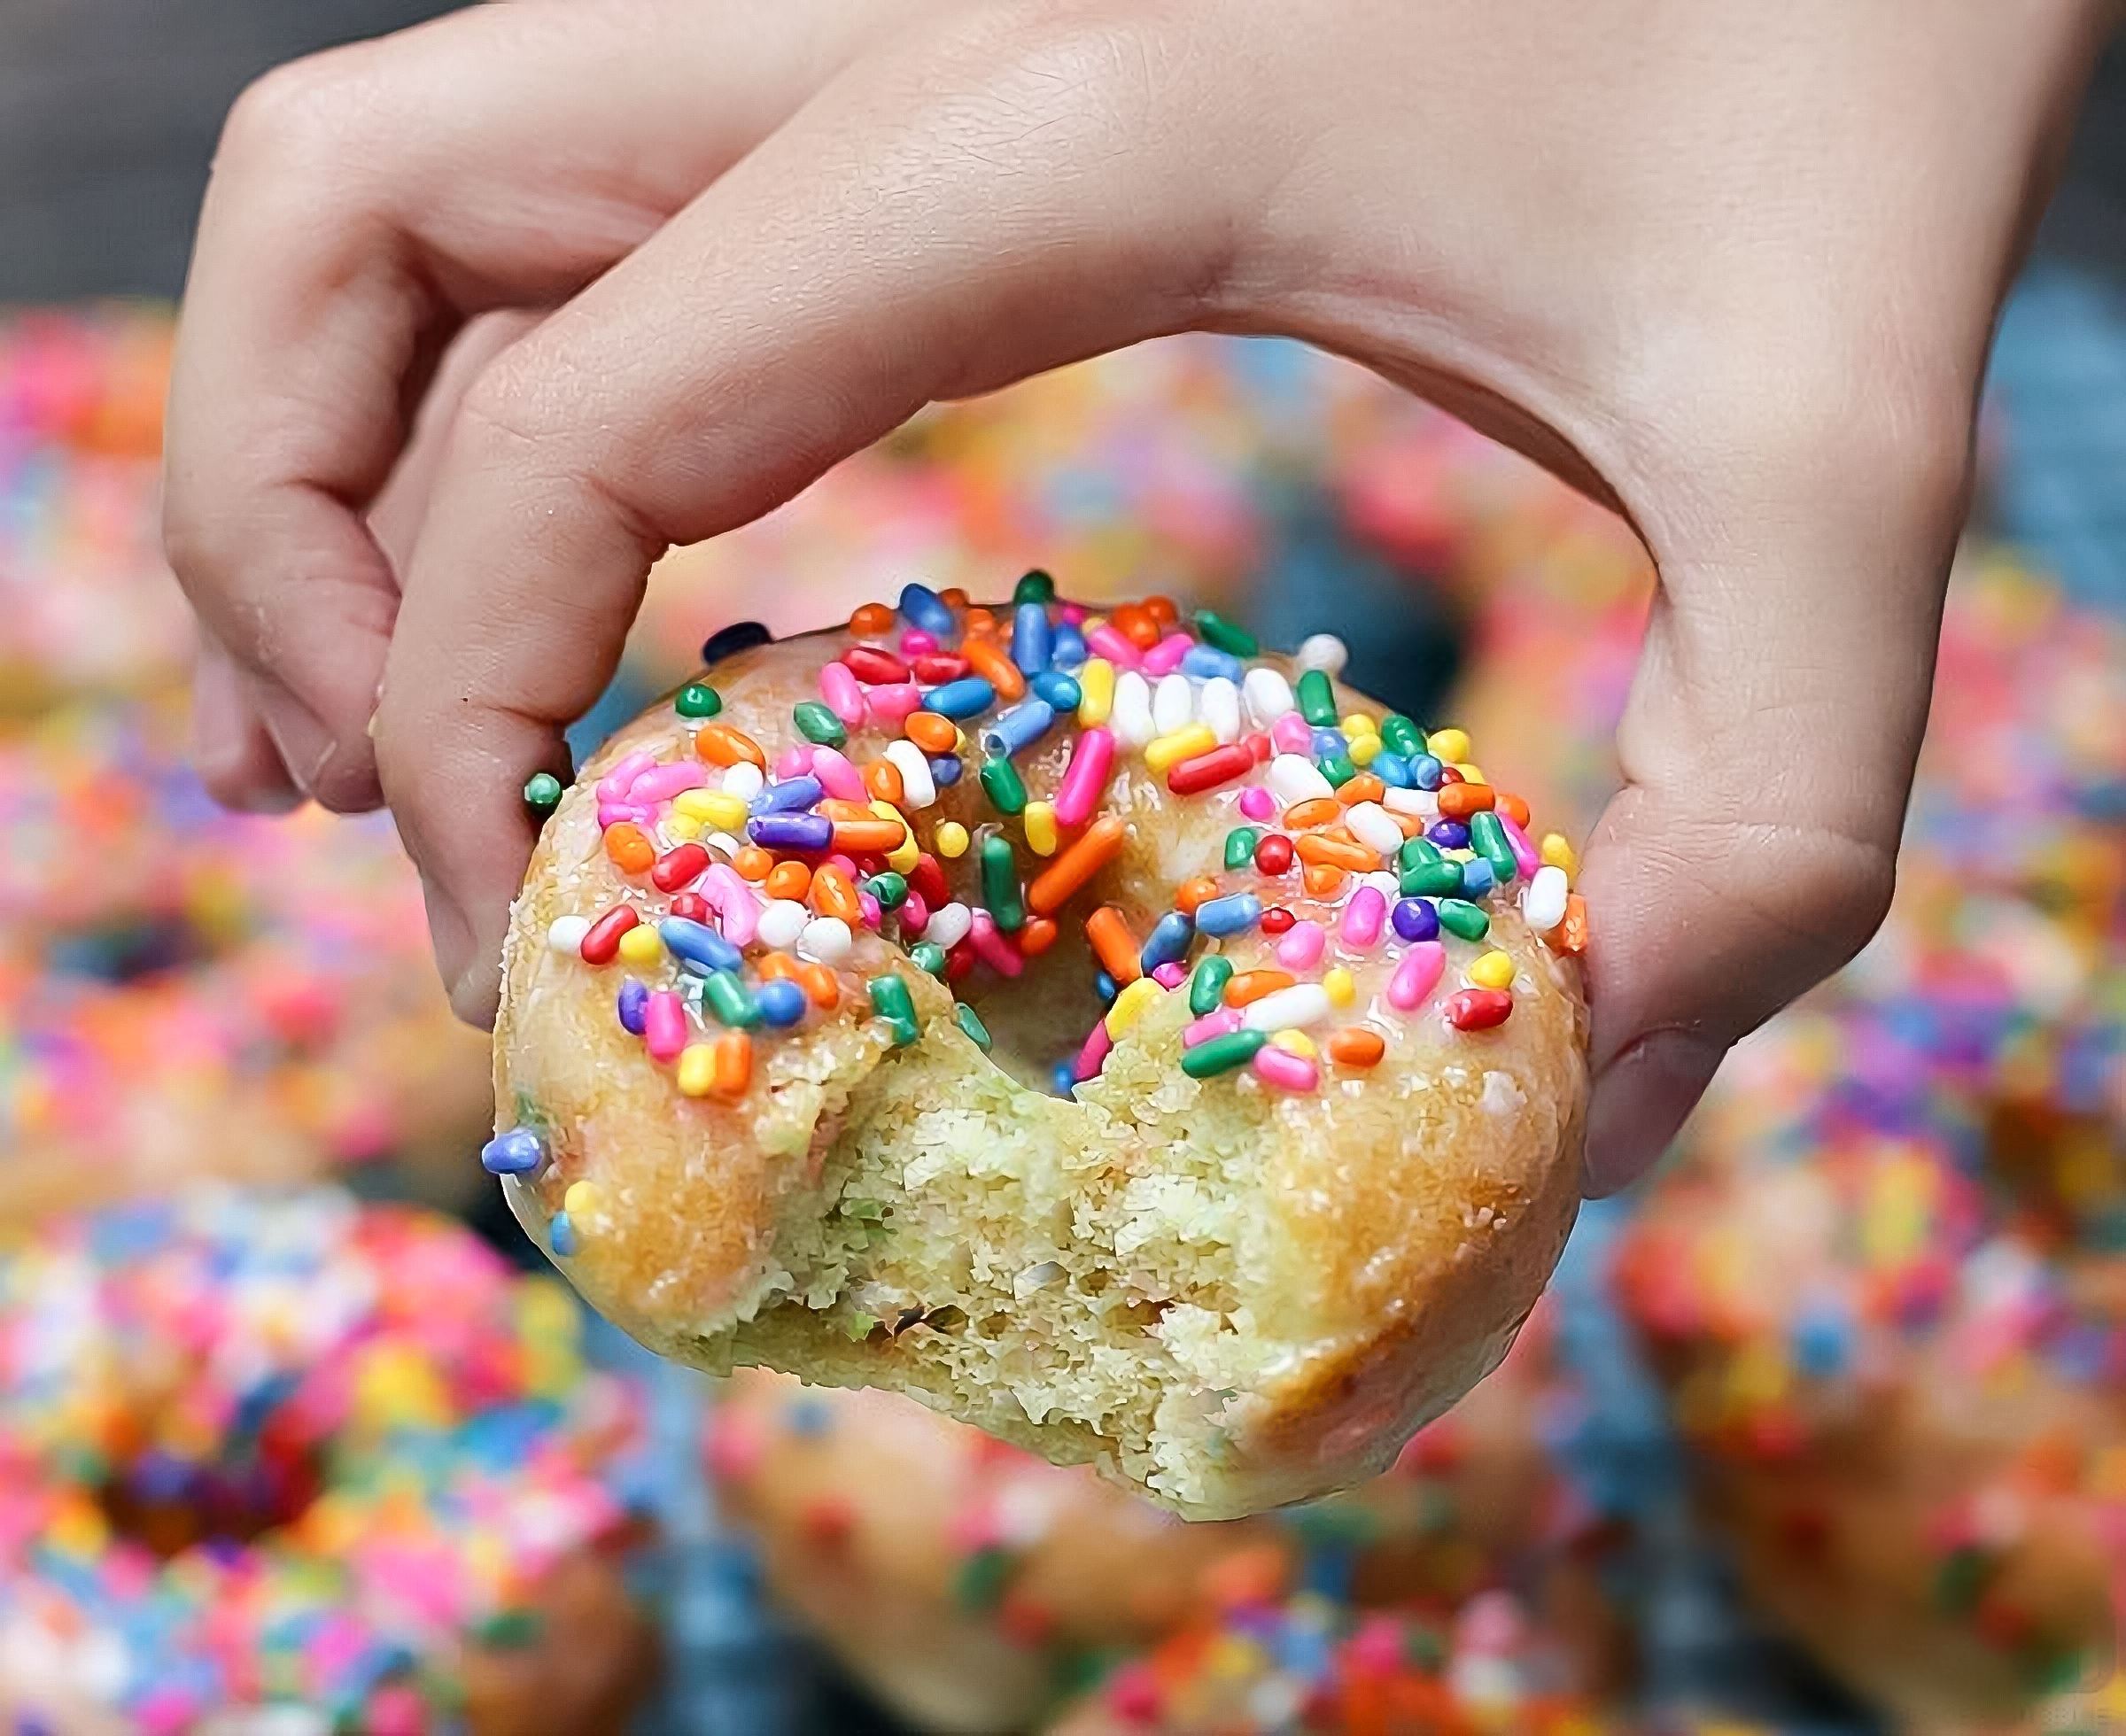 pancake mix donuts - hand holding a baked donut made with pancake mix topped with sprinkles